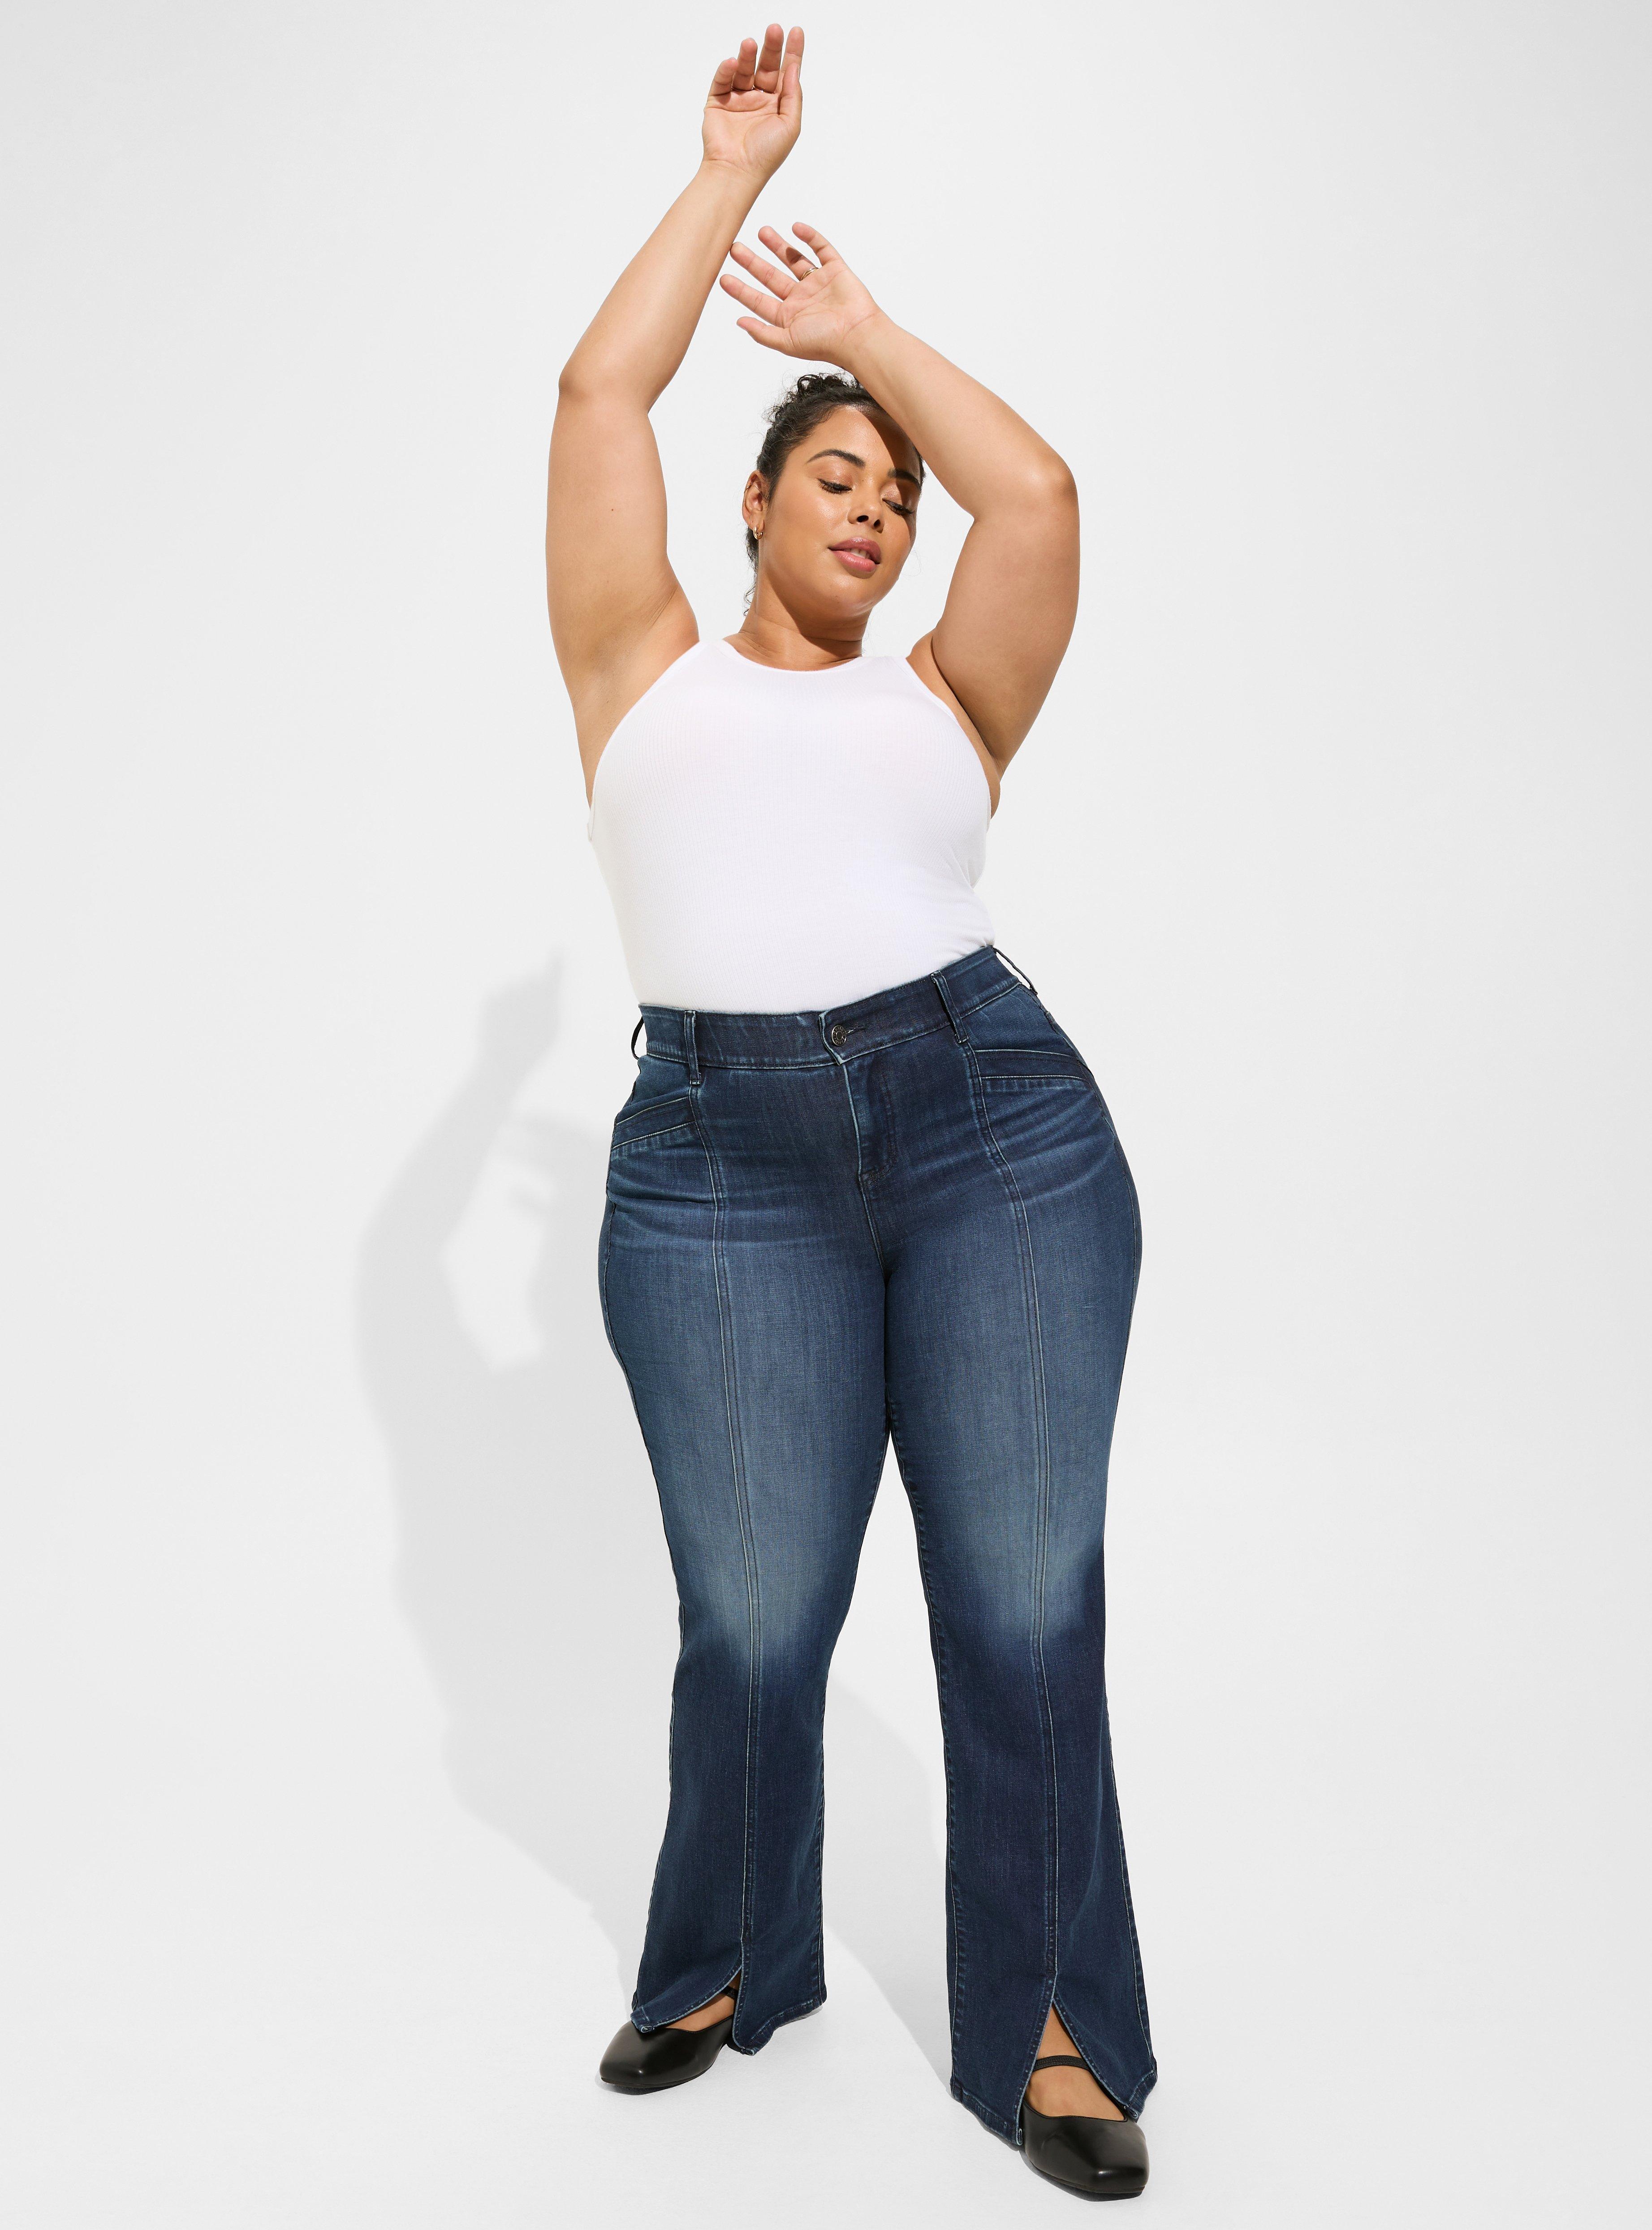 fitting-in-fail-jeans-fupa